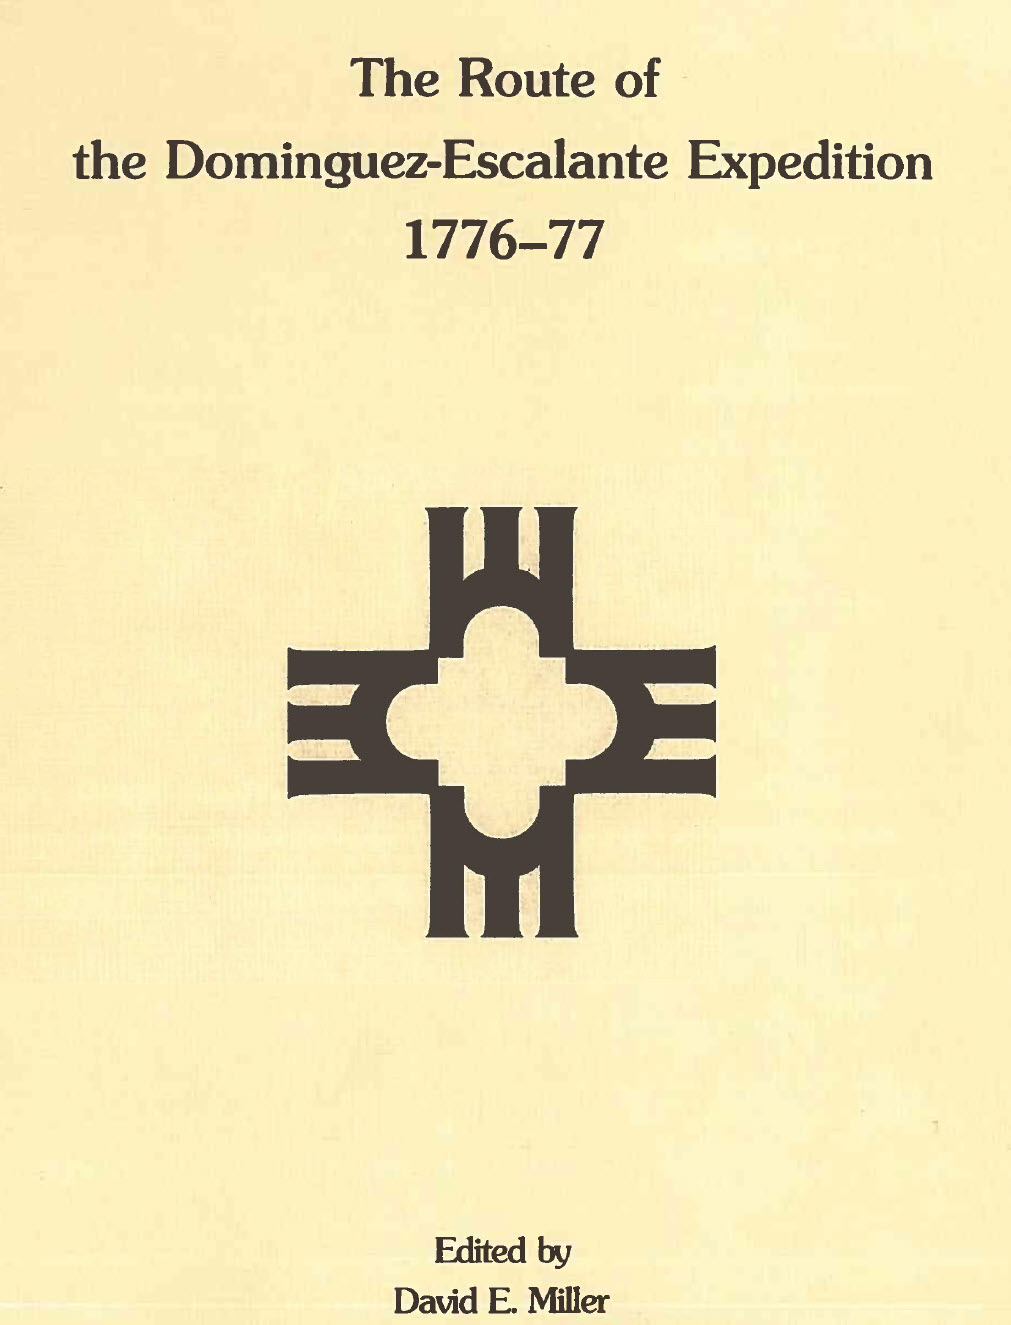 The Route of the Dominguez-Escalante Expedition 1776-77